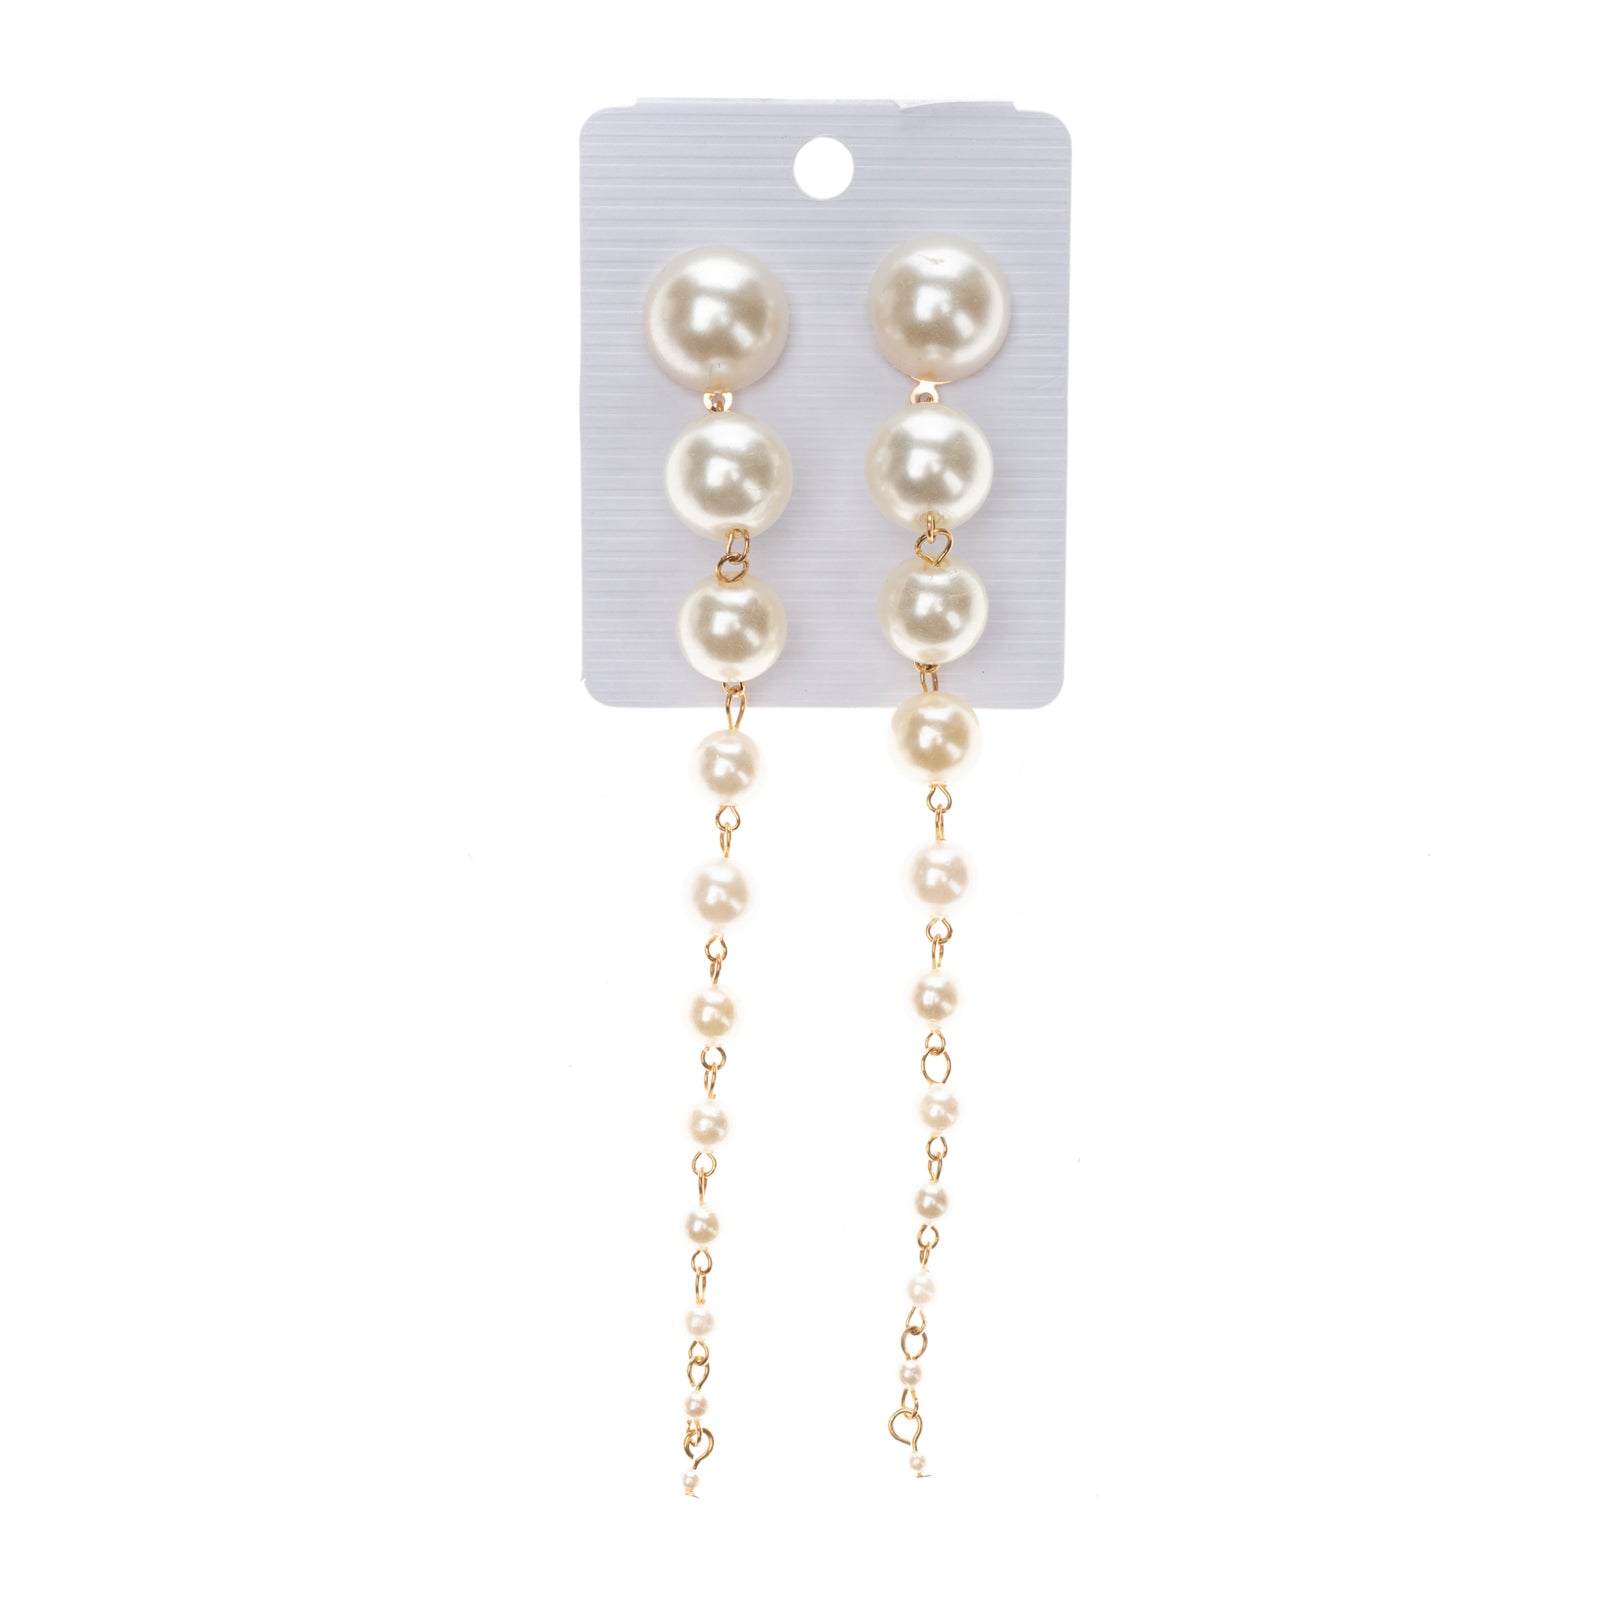 8 Faux Pearls Drops Earrings Two Tone Post Back Closure gallery main photo